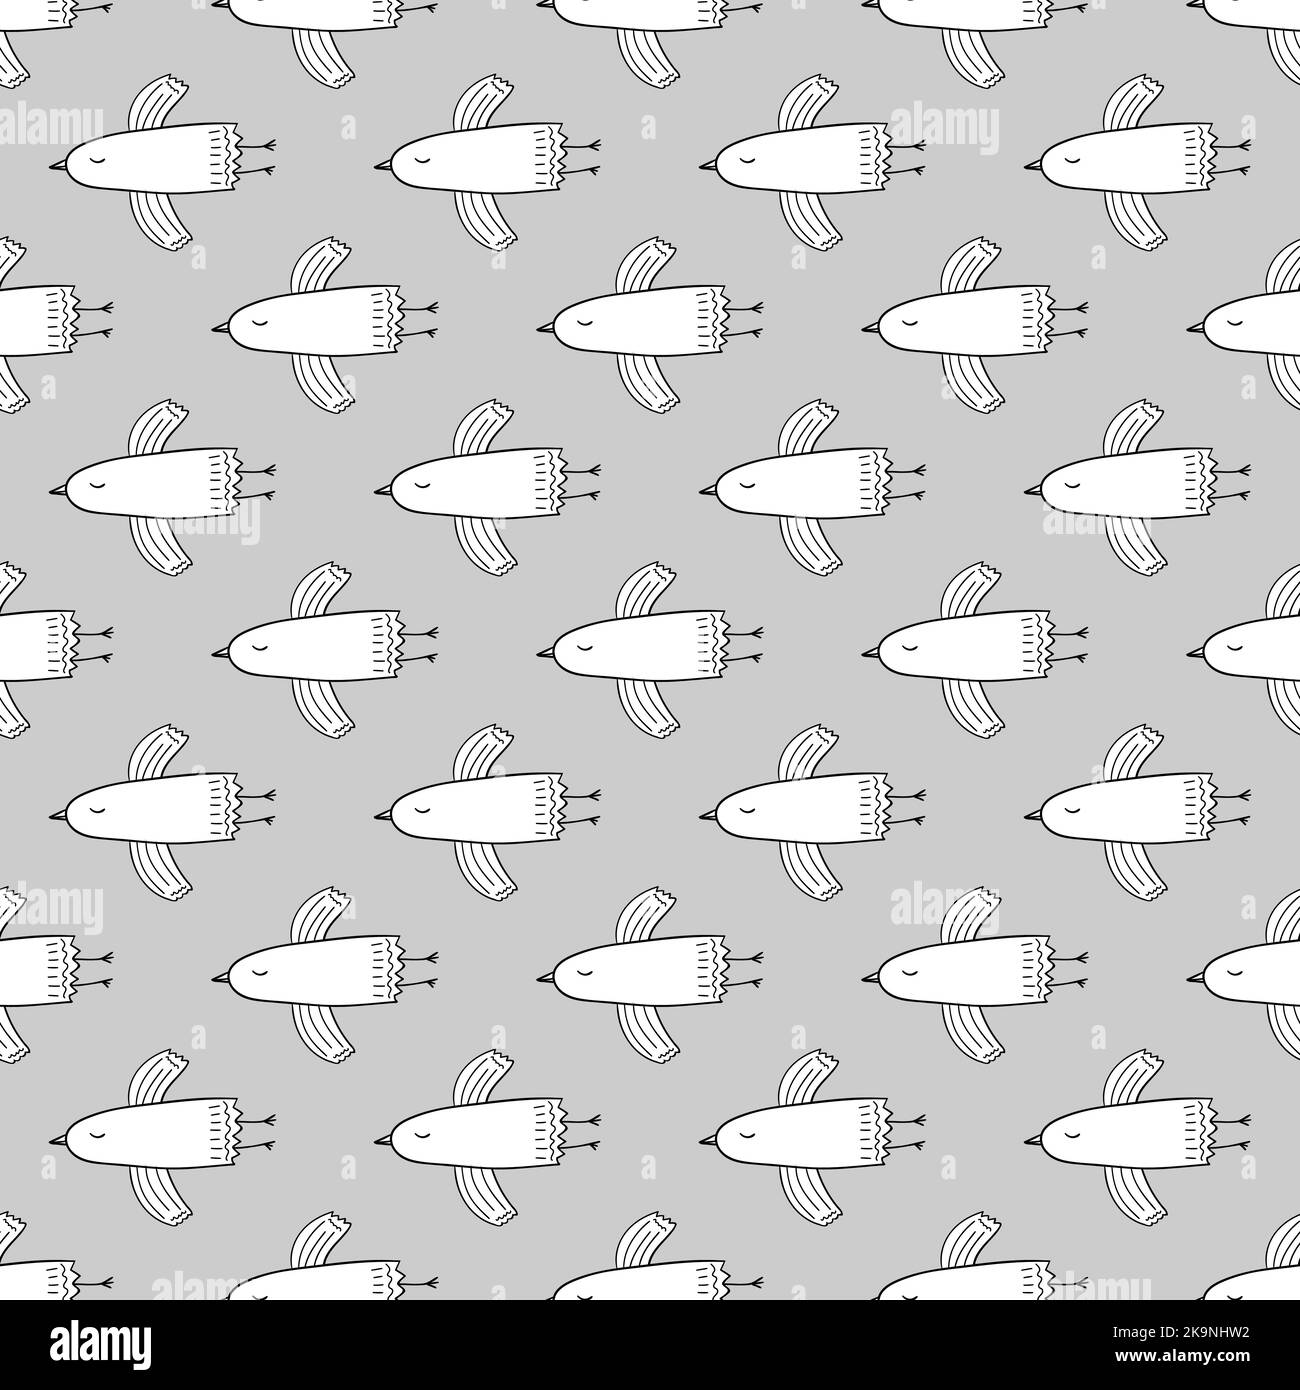 Seamless pattern with cute flying birds in cartoon style. Decorative background. Stock Vector